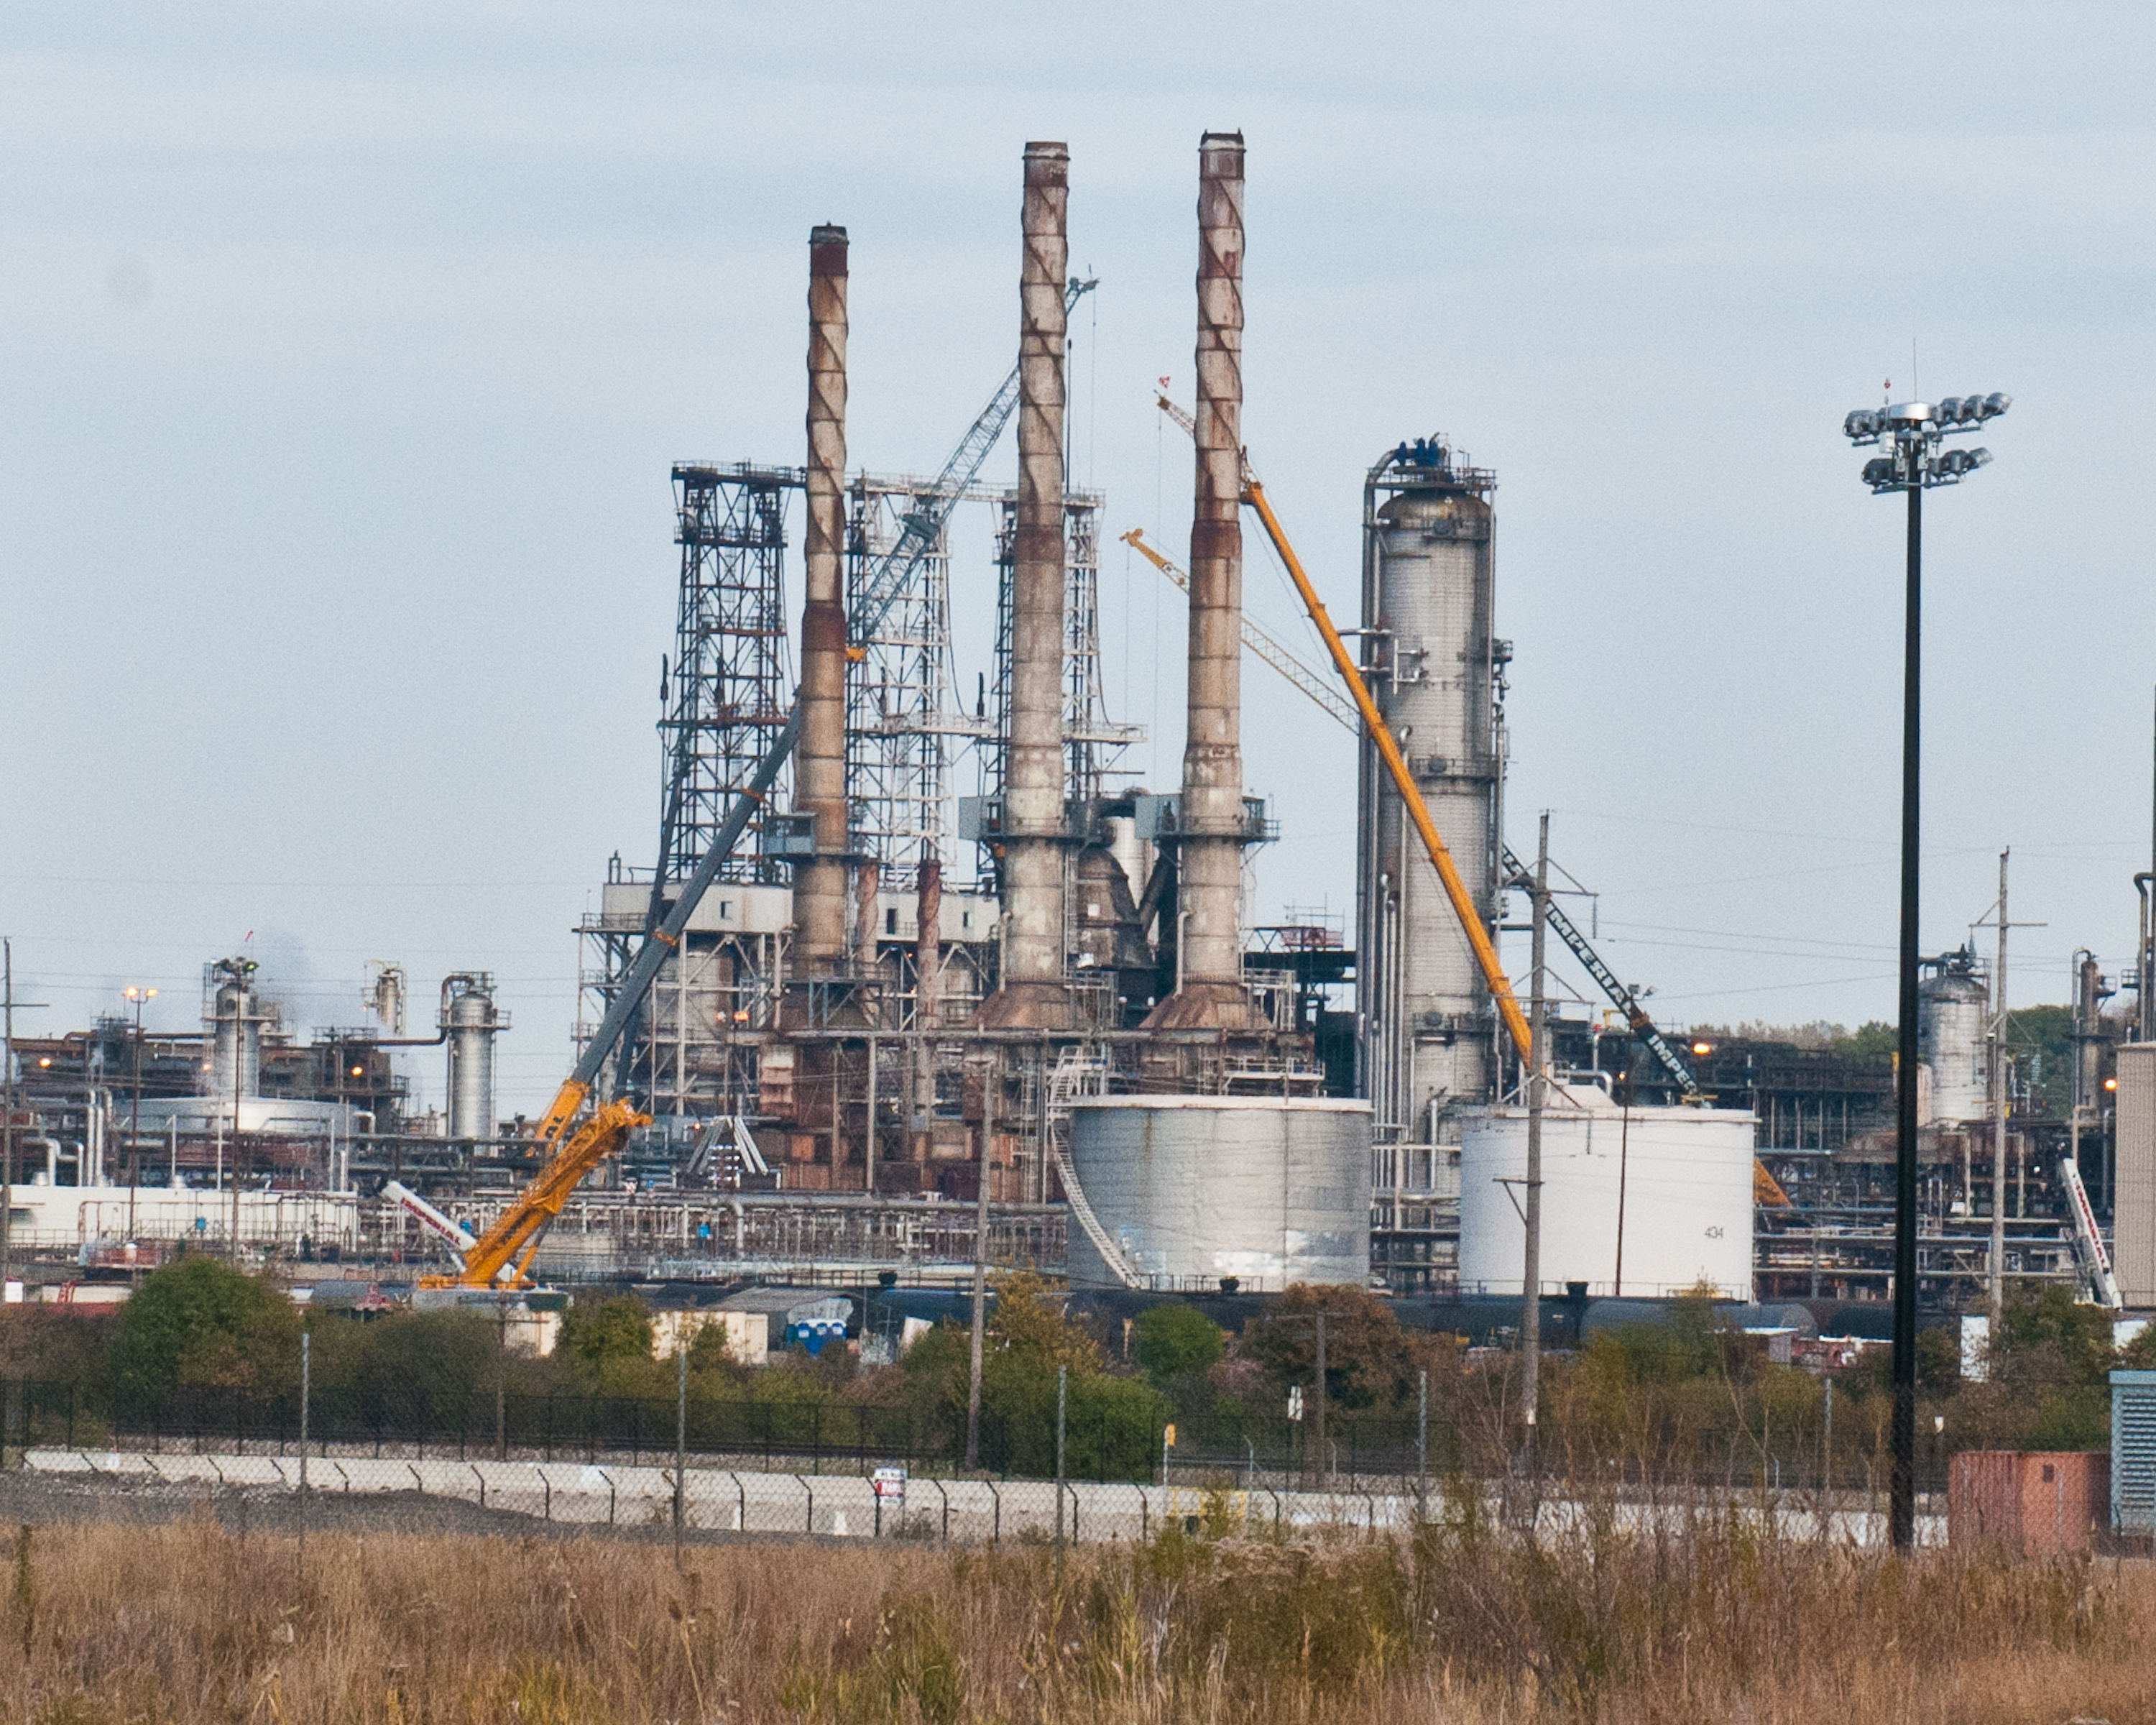 fire-at-citgo-refinery-in-lemont-il-crane-network-news